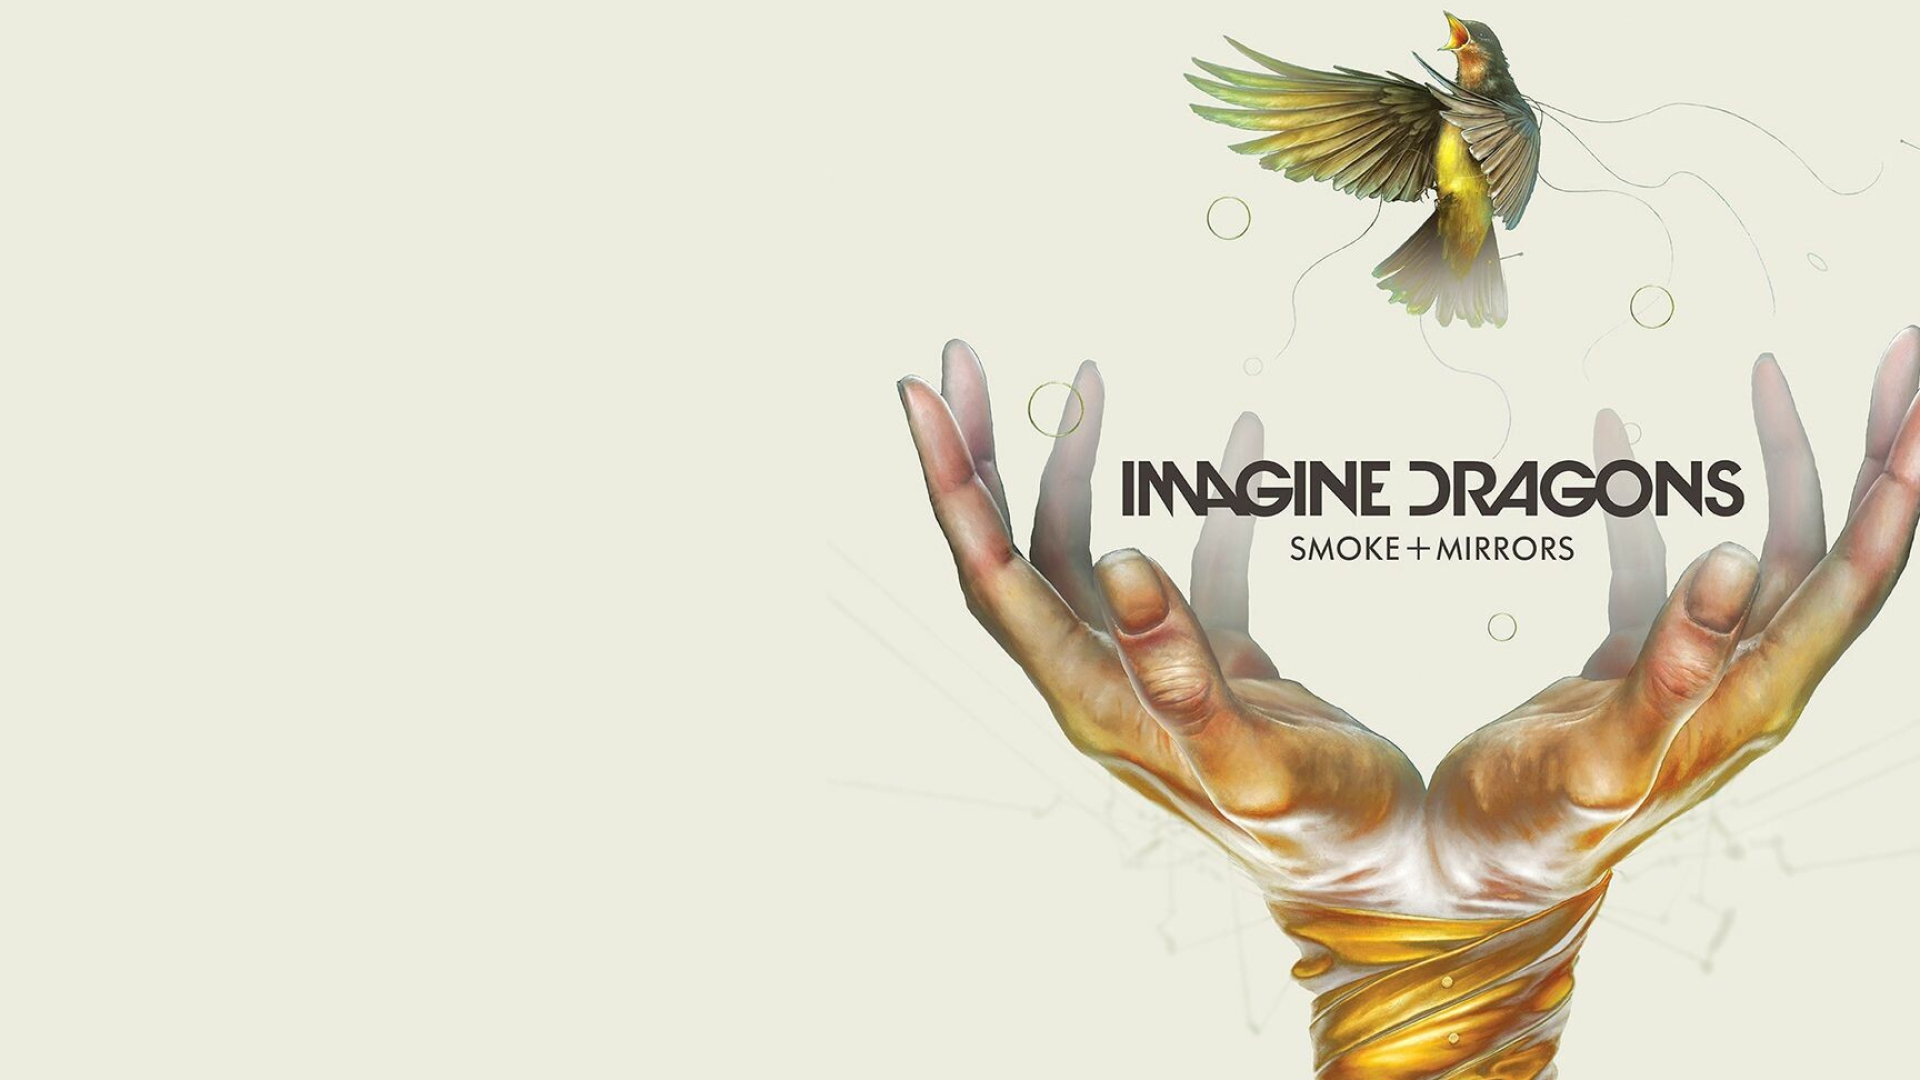 Imagine Dragons: "Smoke and Mirrors" and "I'm So Sorry" were released as promotional singles in 2015. 1920x1080 Full HD Background.